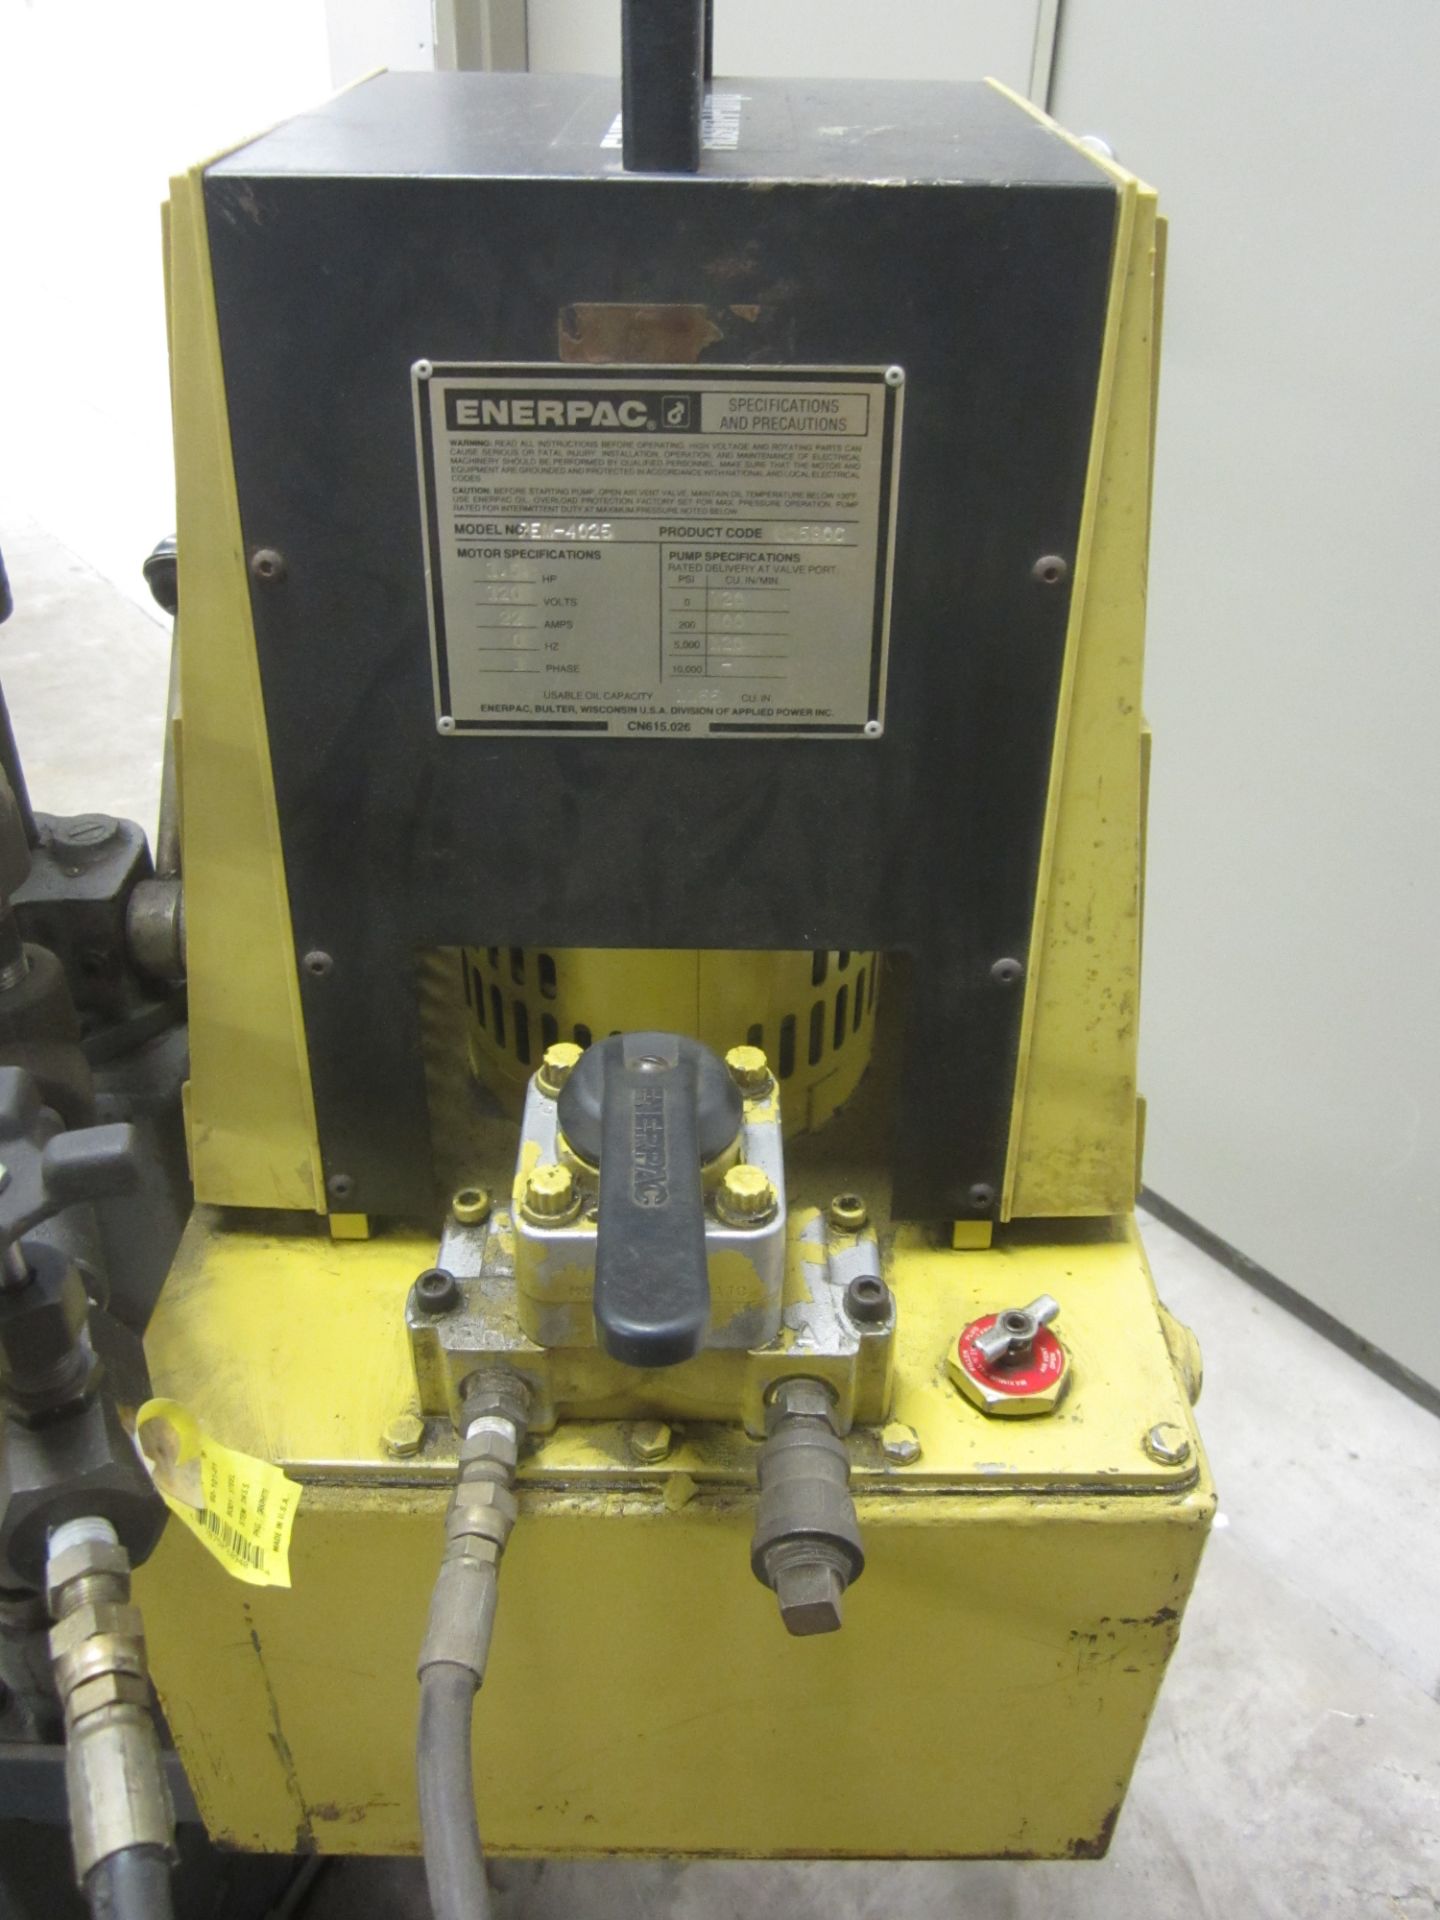 Wilson Model 37FMD-3 H-Frame Hydraulic Shop Press, SN 2336, 75 Ton Cap., with Enerpac Hydraulic - Image 3 of 6